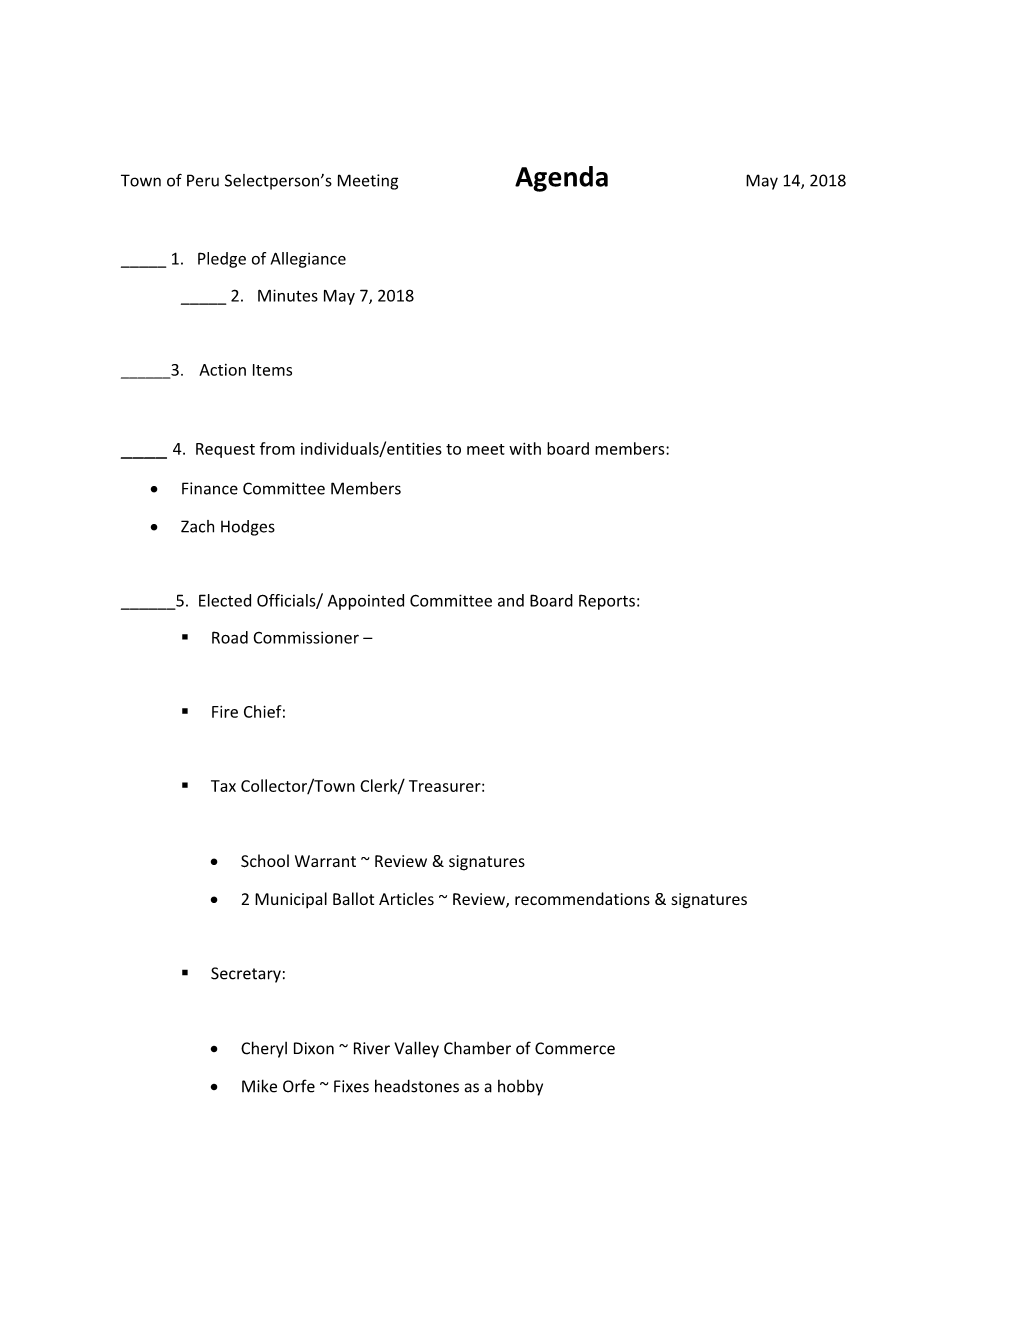 Town of Peru Selectperson S Meeting Agenda May14, 2018